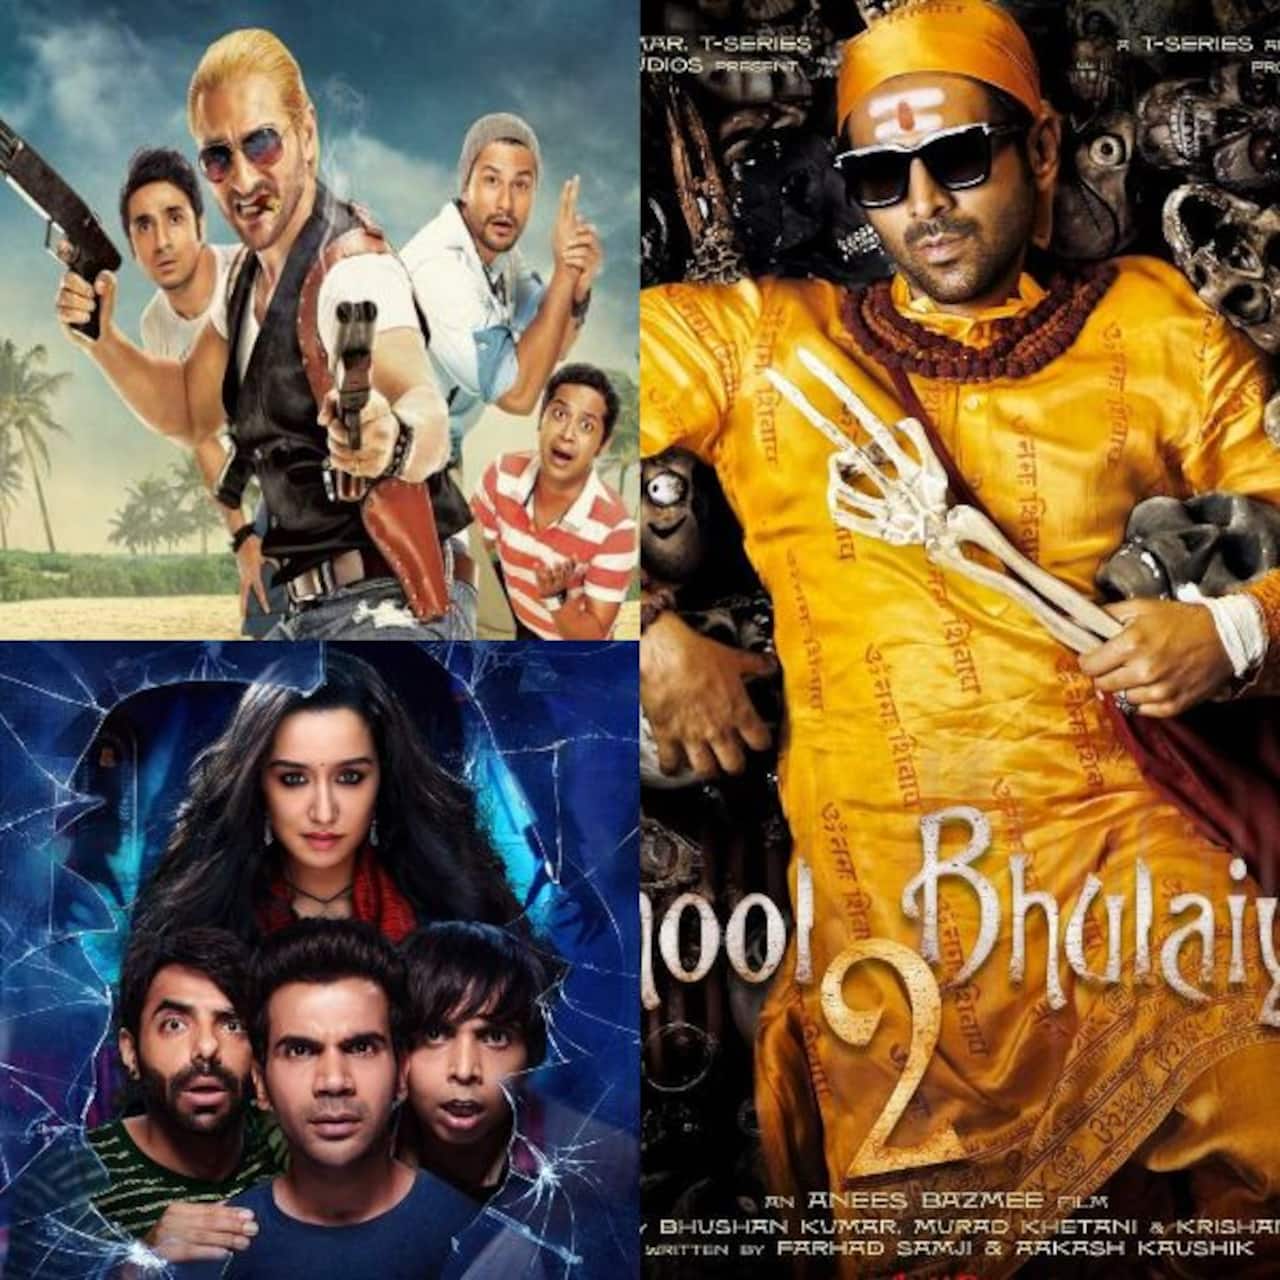 What to watch on OTT today: Before Bhool Bhulaiyaa 2, check out Go Goa Gone, Stree and more horror comedies on Netflix, Hotstar, ZEE5 and other platforms